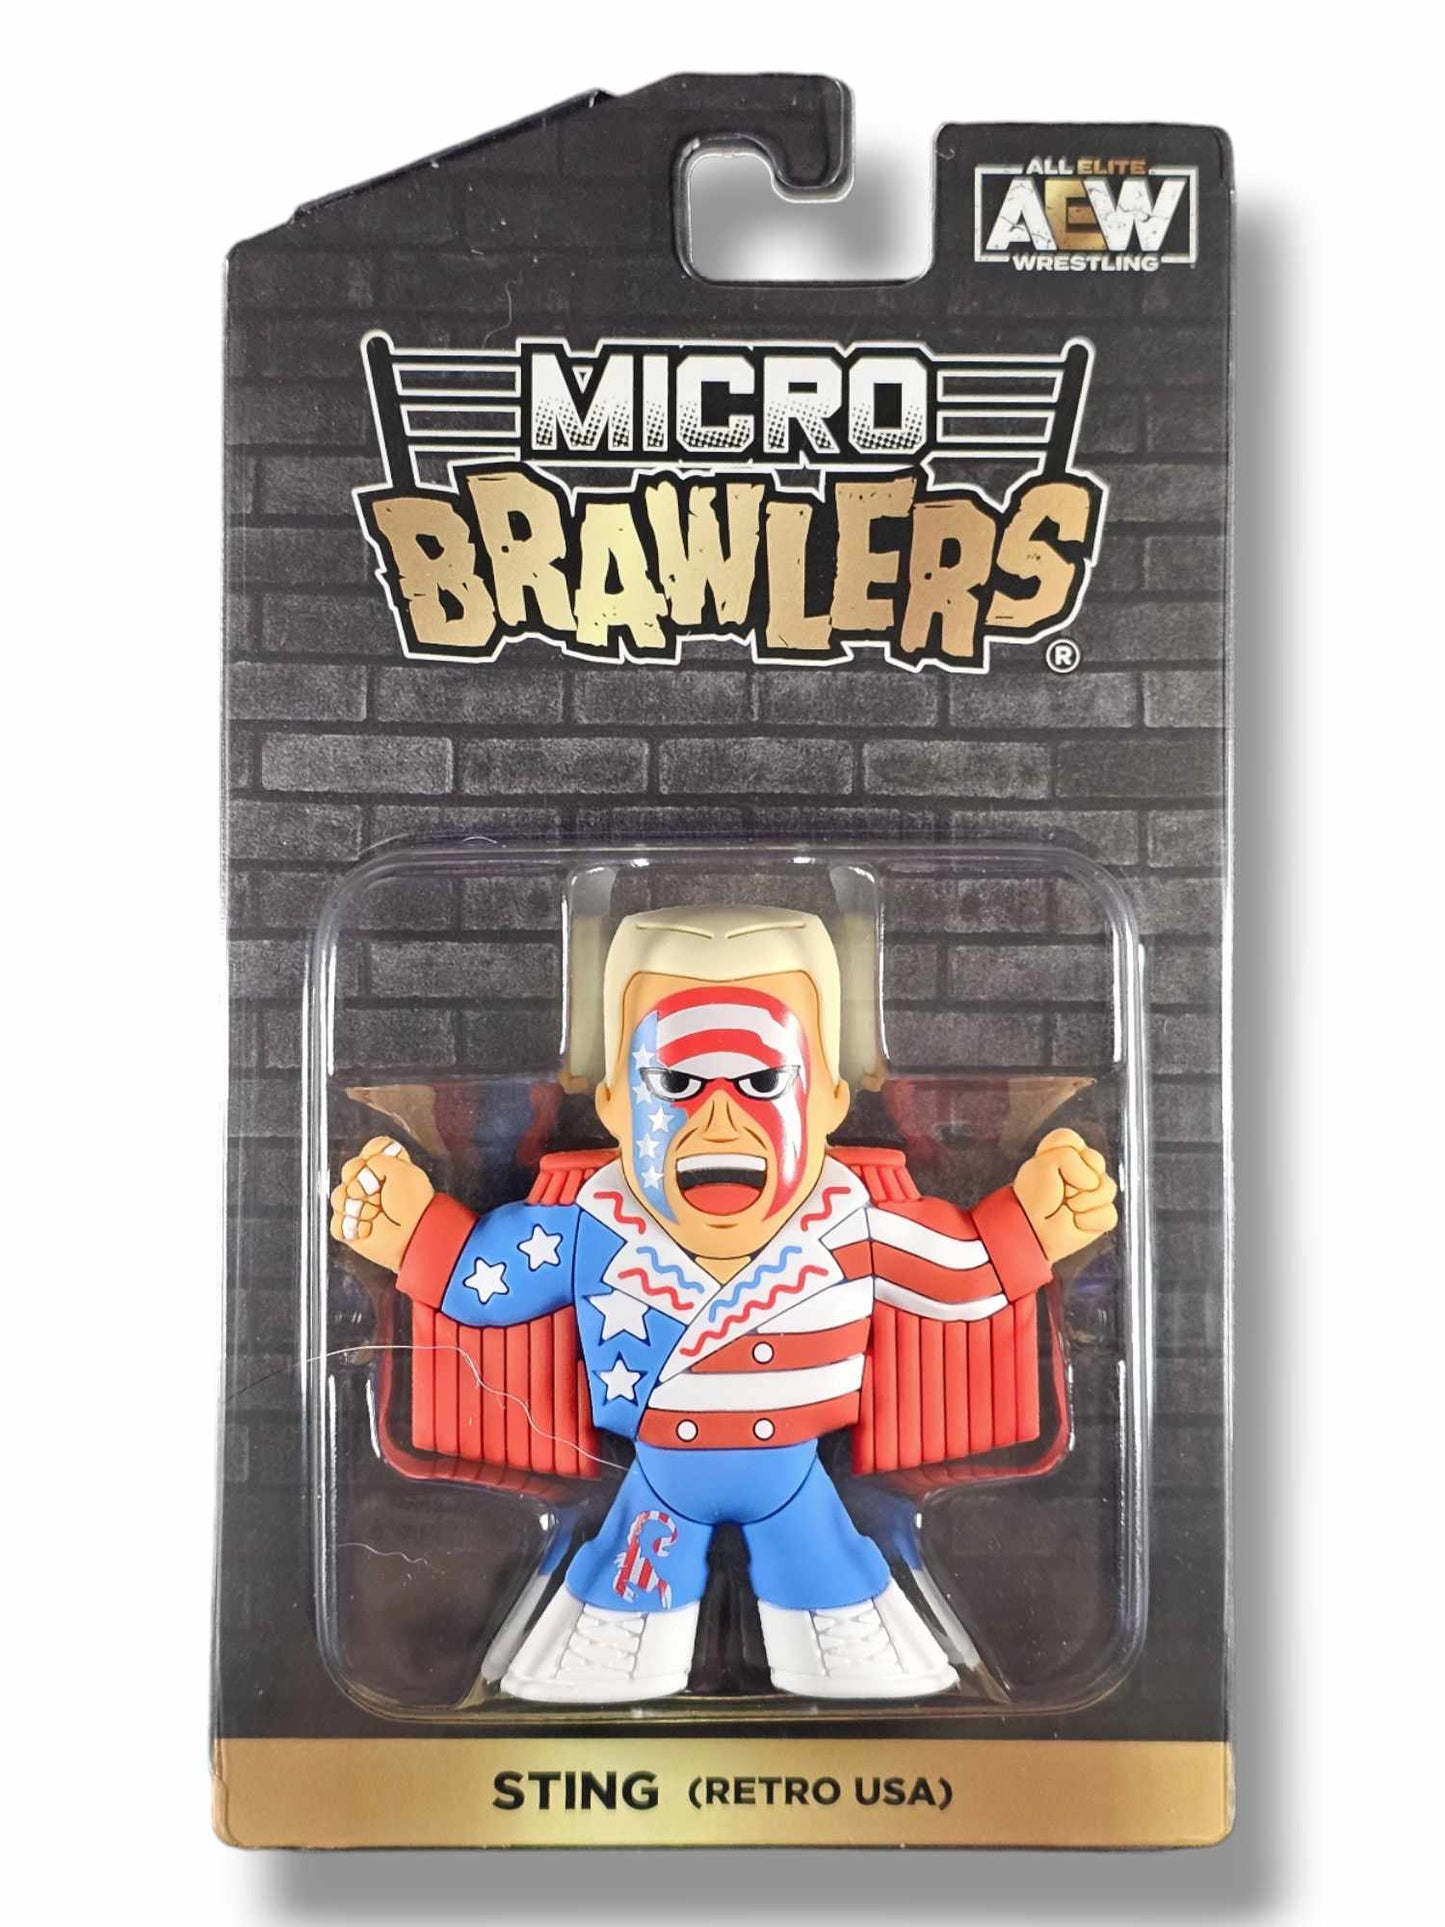 STING's Retro AEW Official Micro Brawler Is Here! 2 Week Only